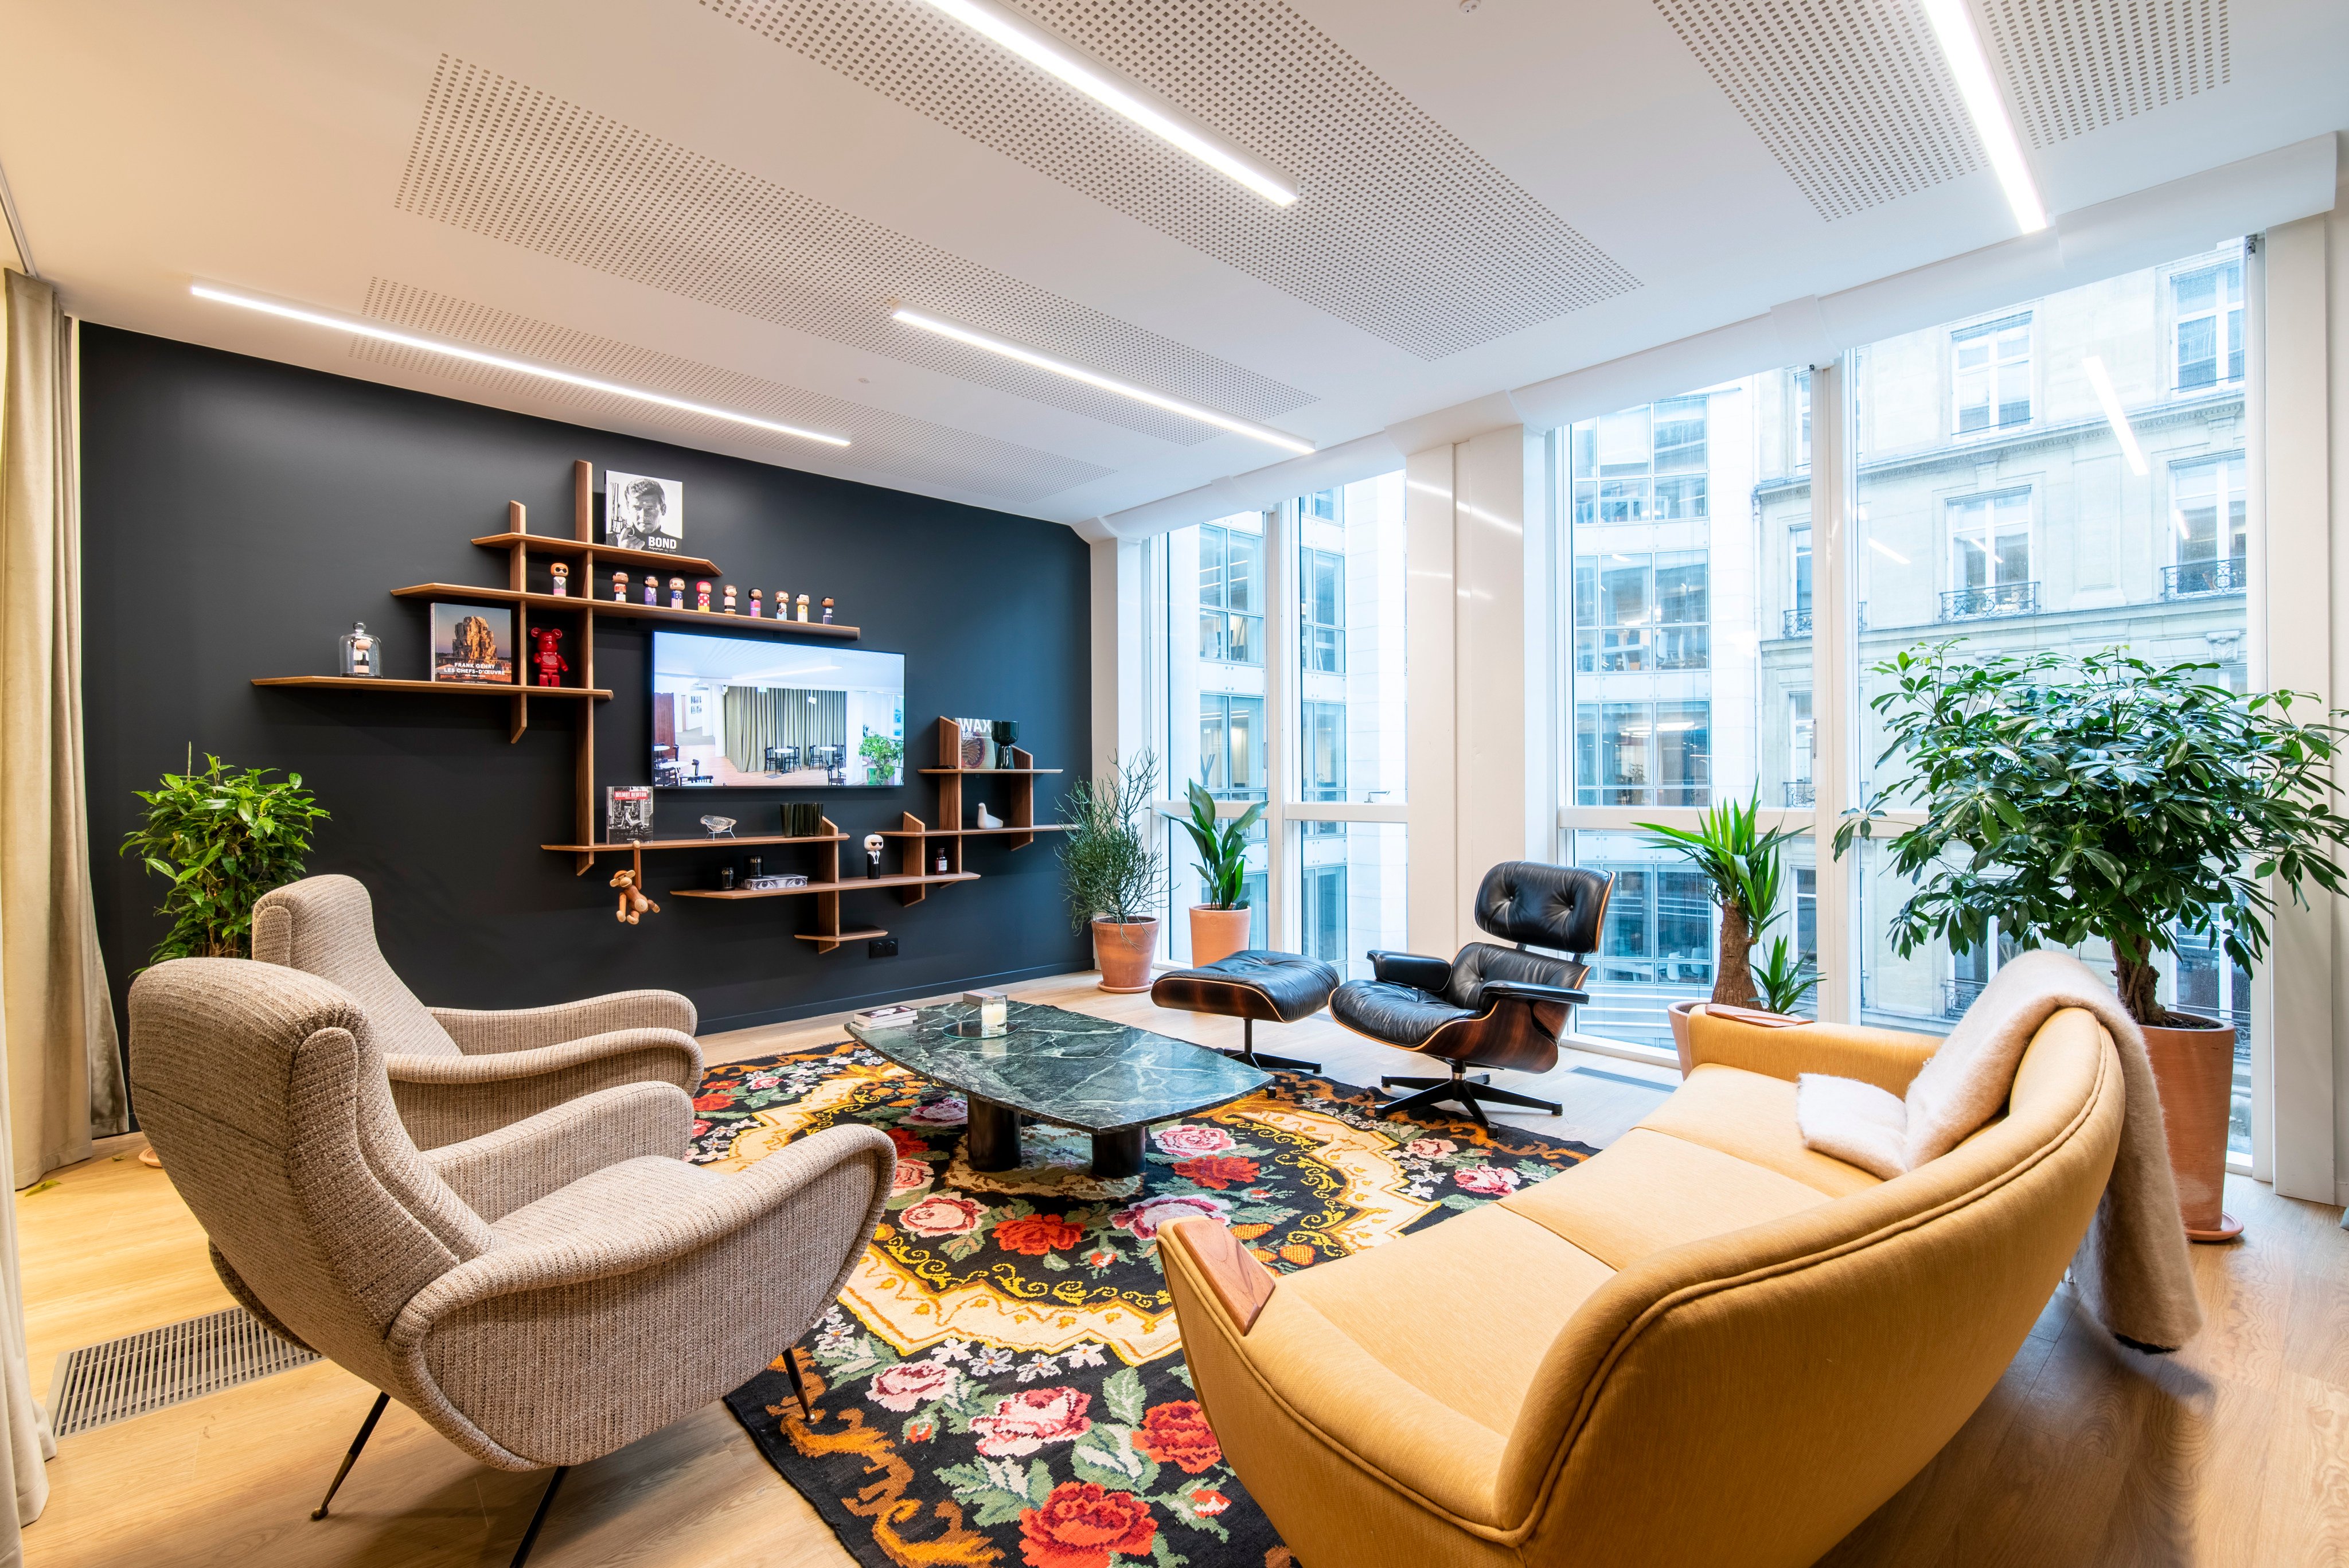 The VIP meeting room in fashion resale platform Vestiaire Collective’s new Paris office looks and feels like a home. Photo: Victor Grandgeorge